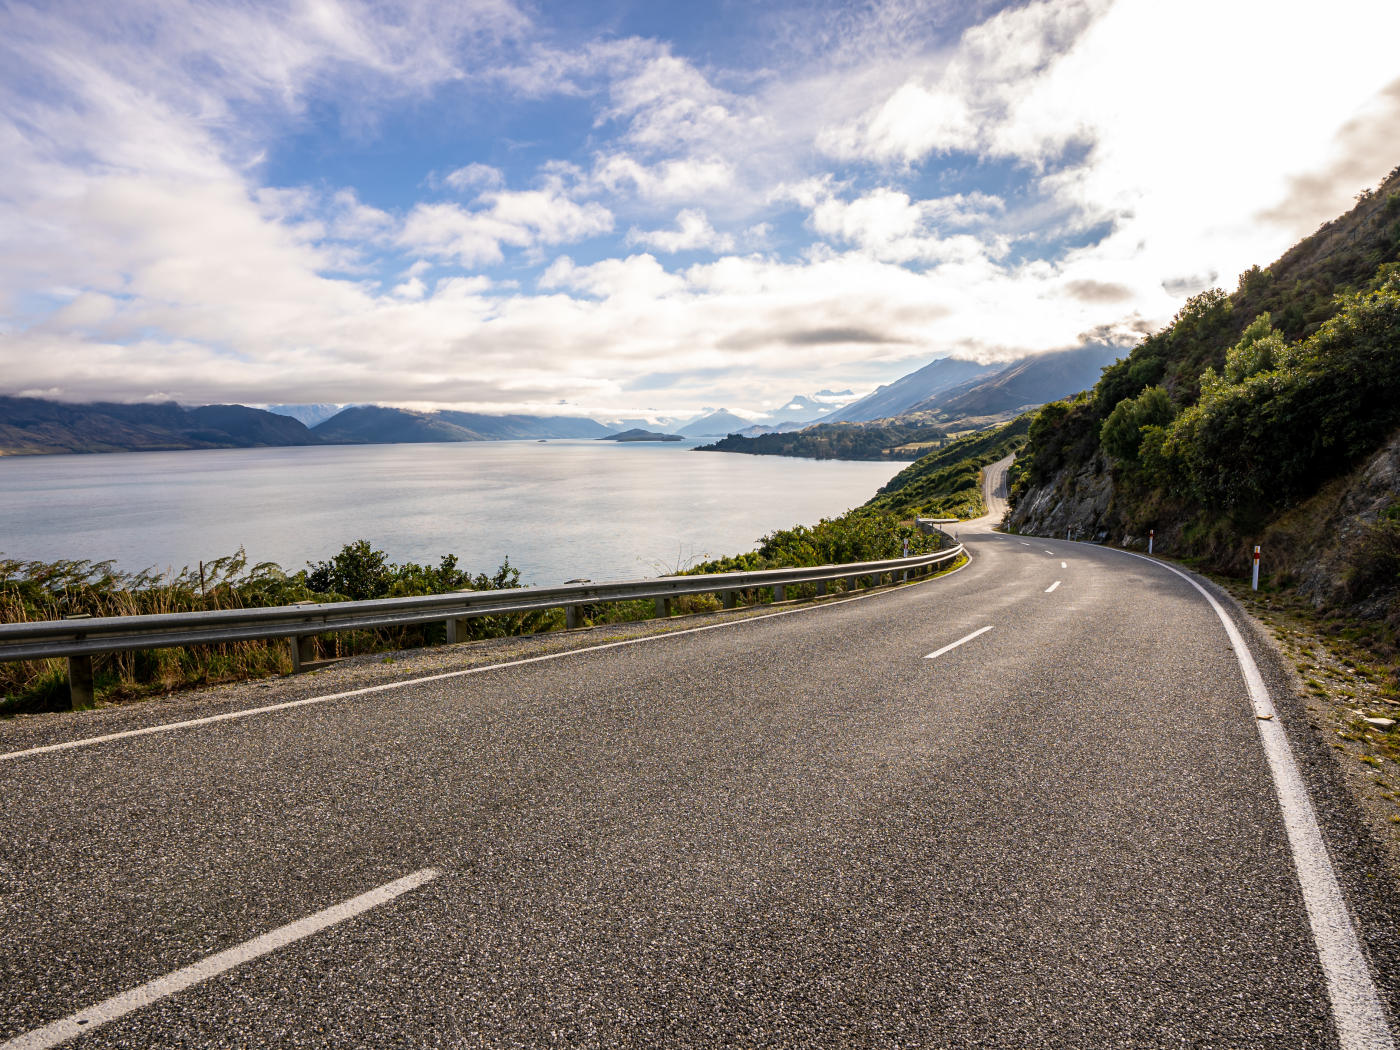 Iconic Queenstown Glenorchy Road with lake and mountain views